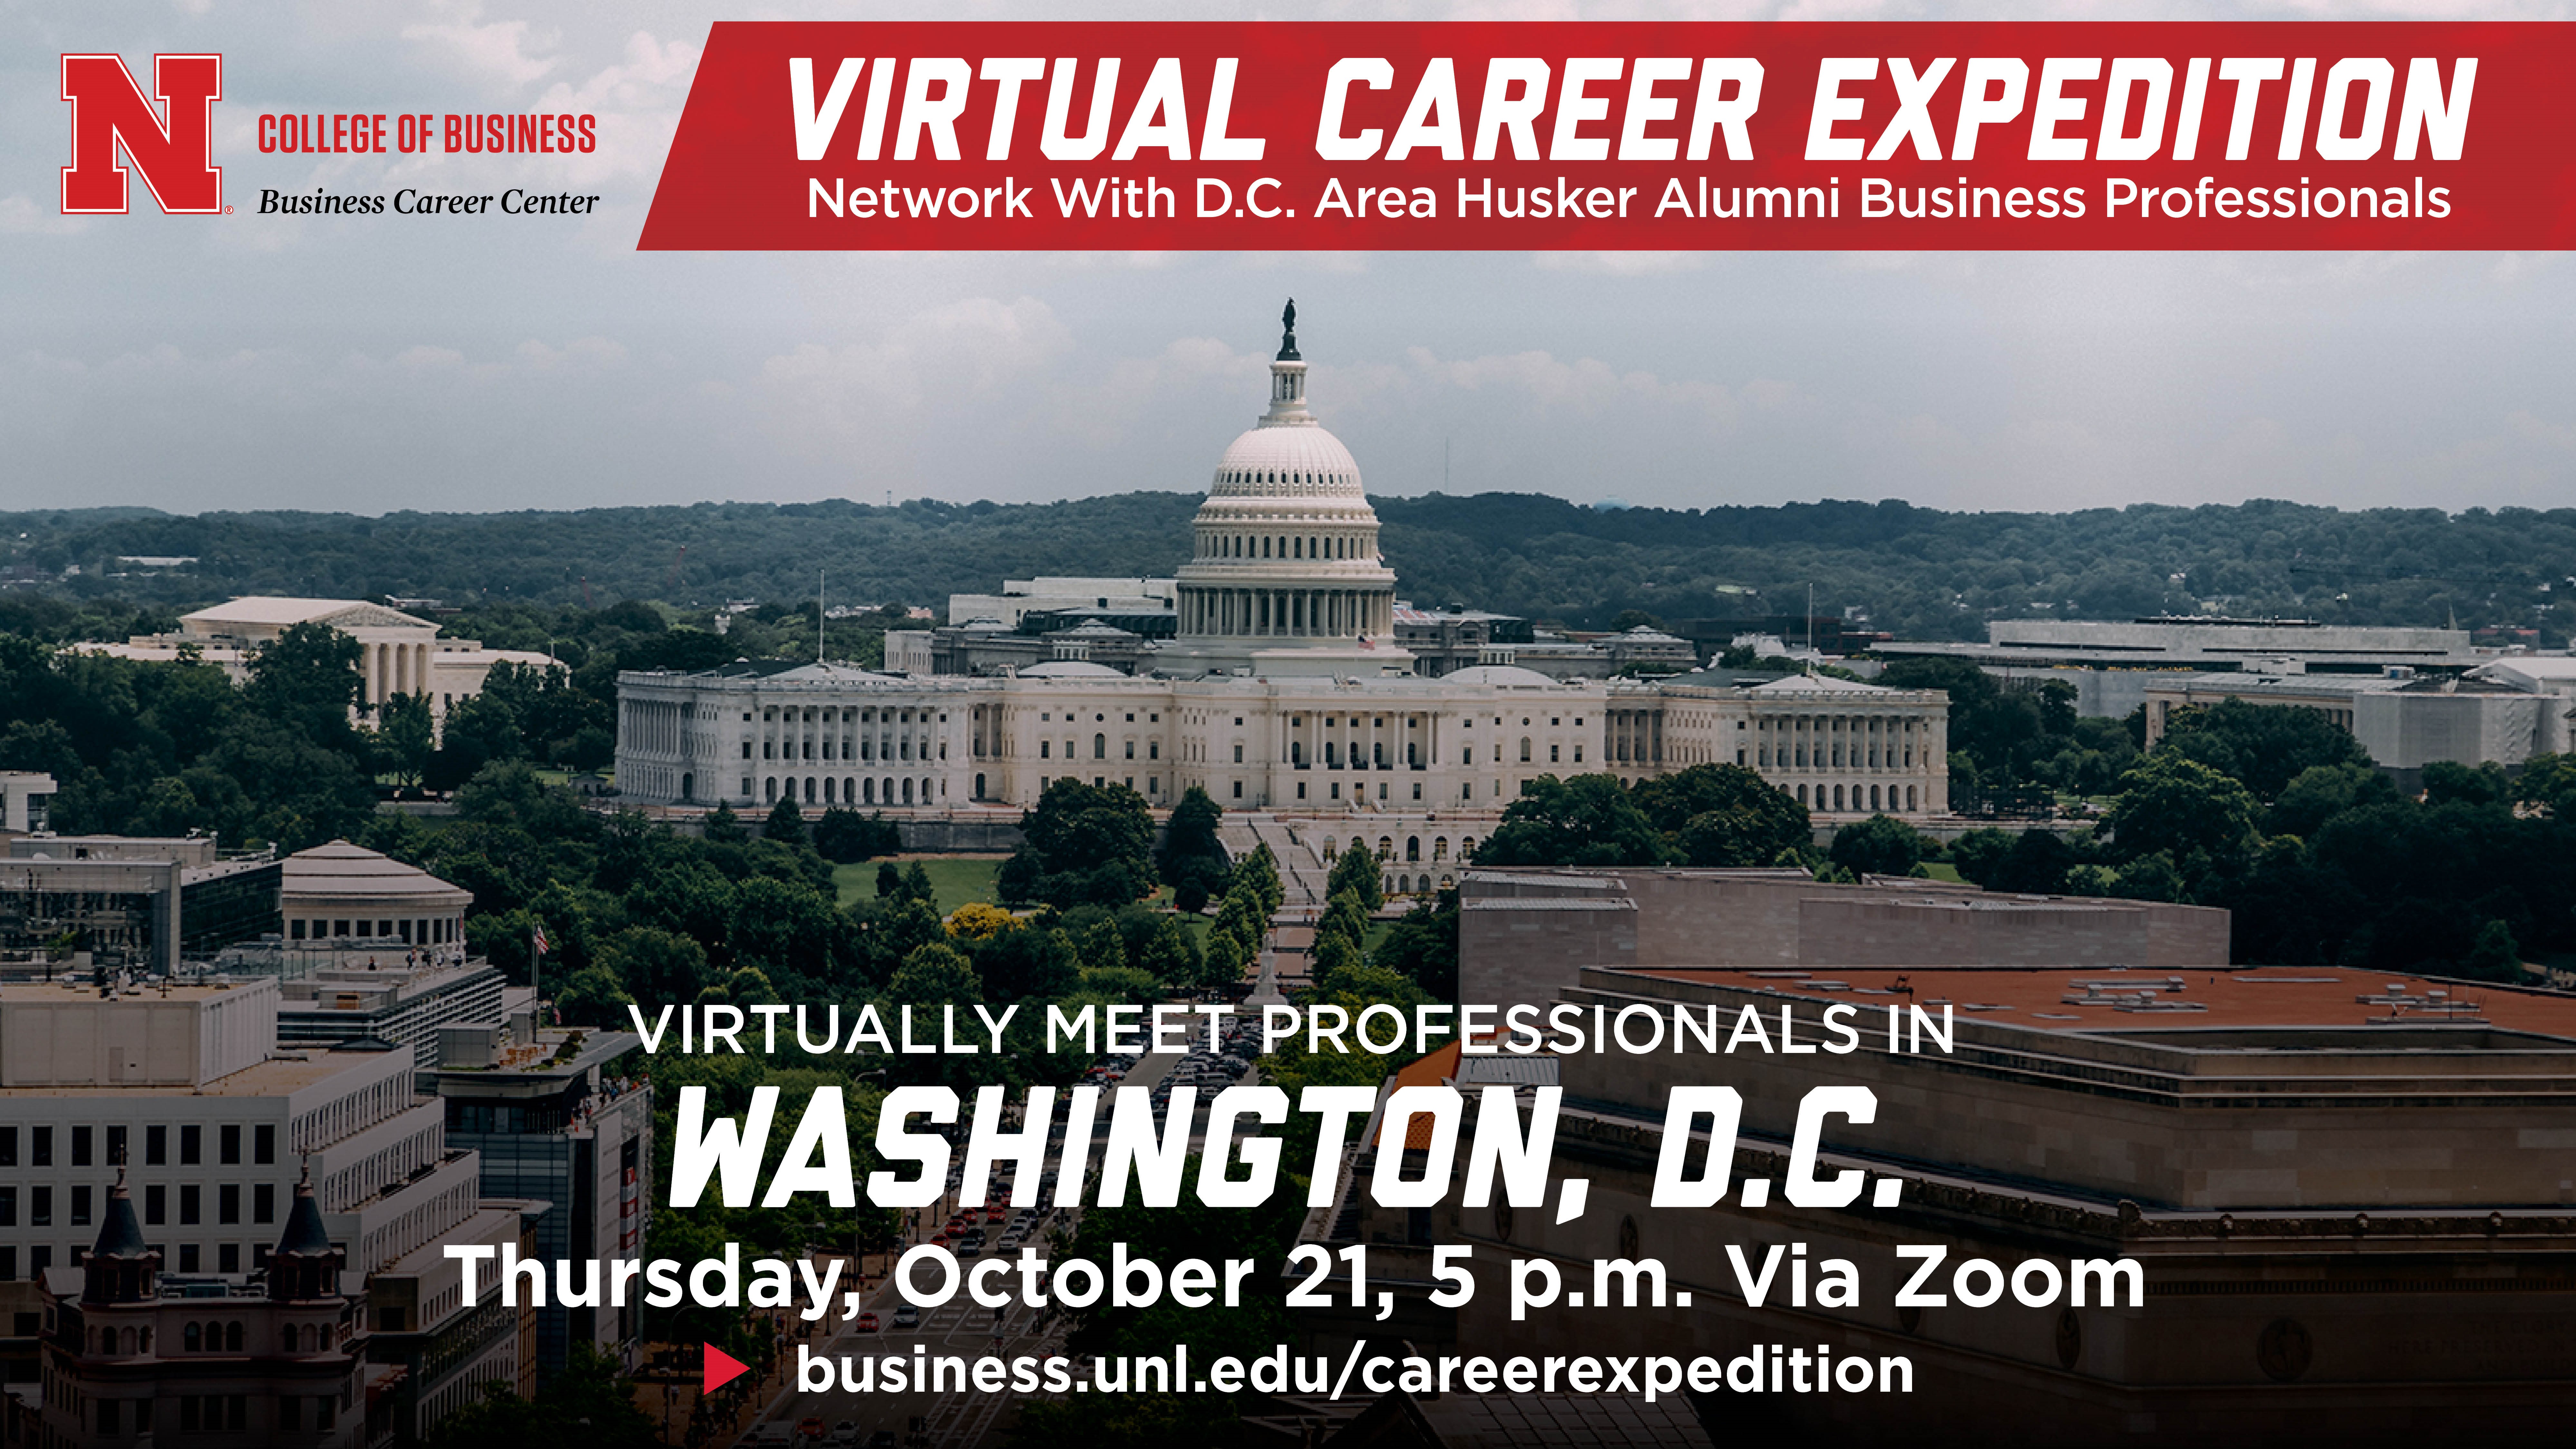 Virtual Networking with D.C. Professionals